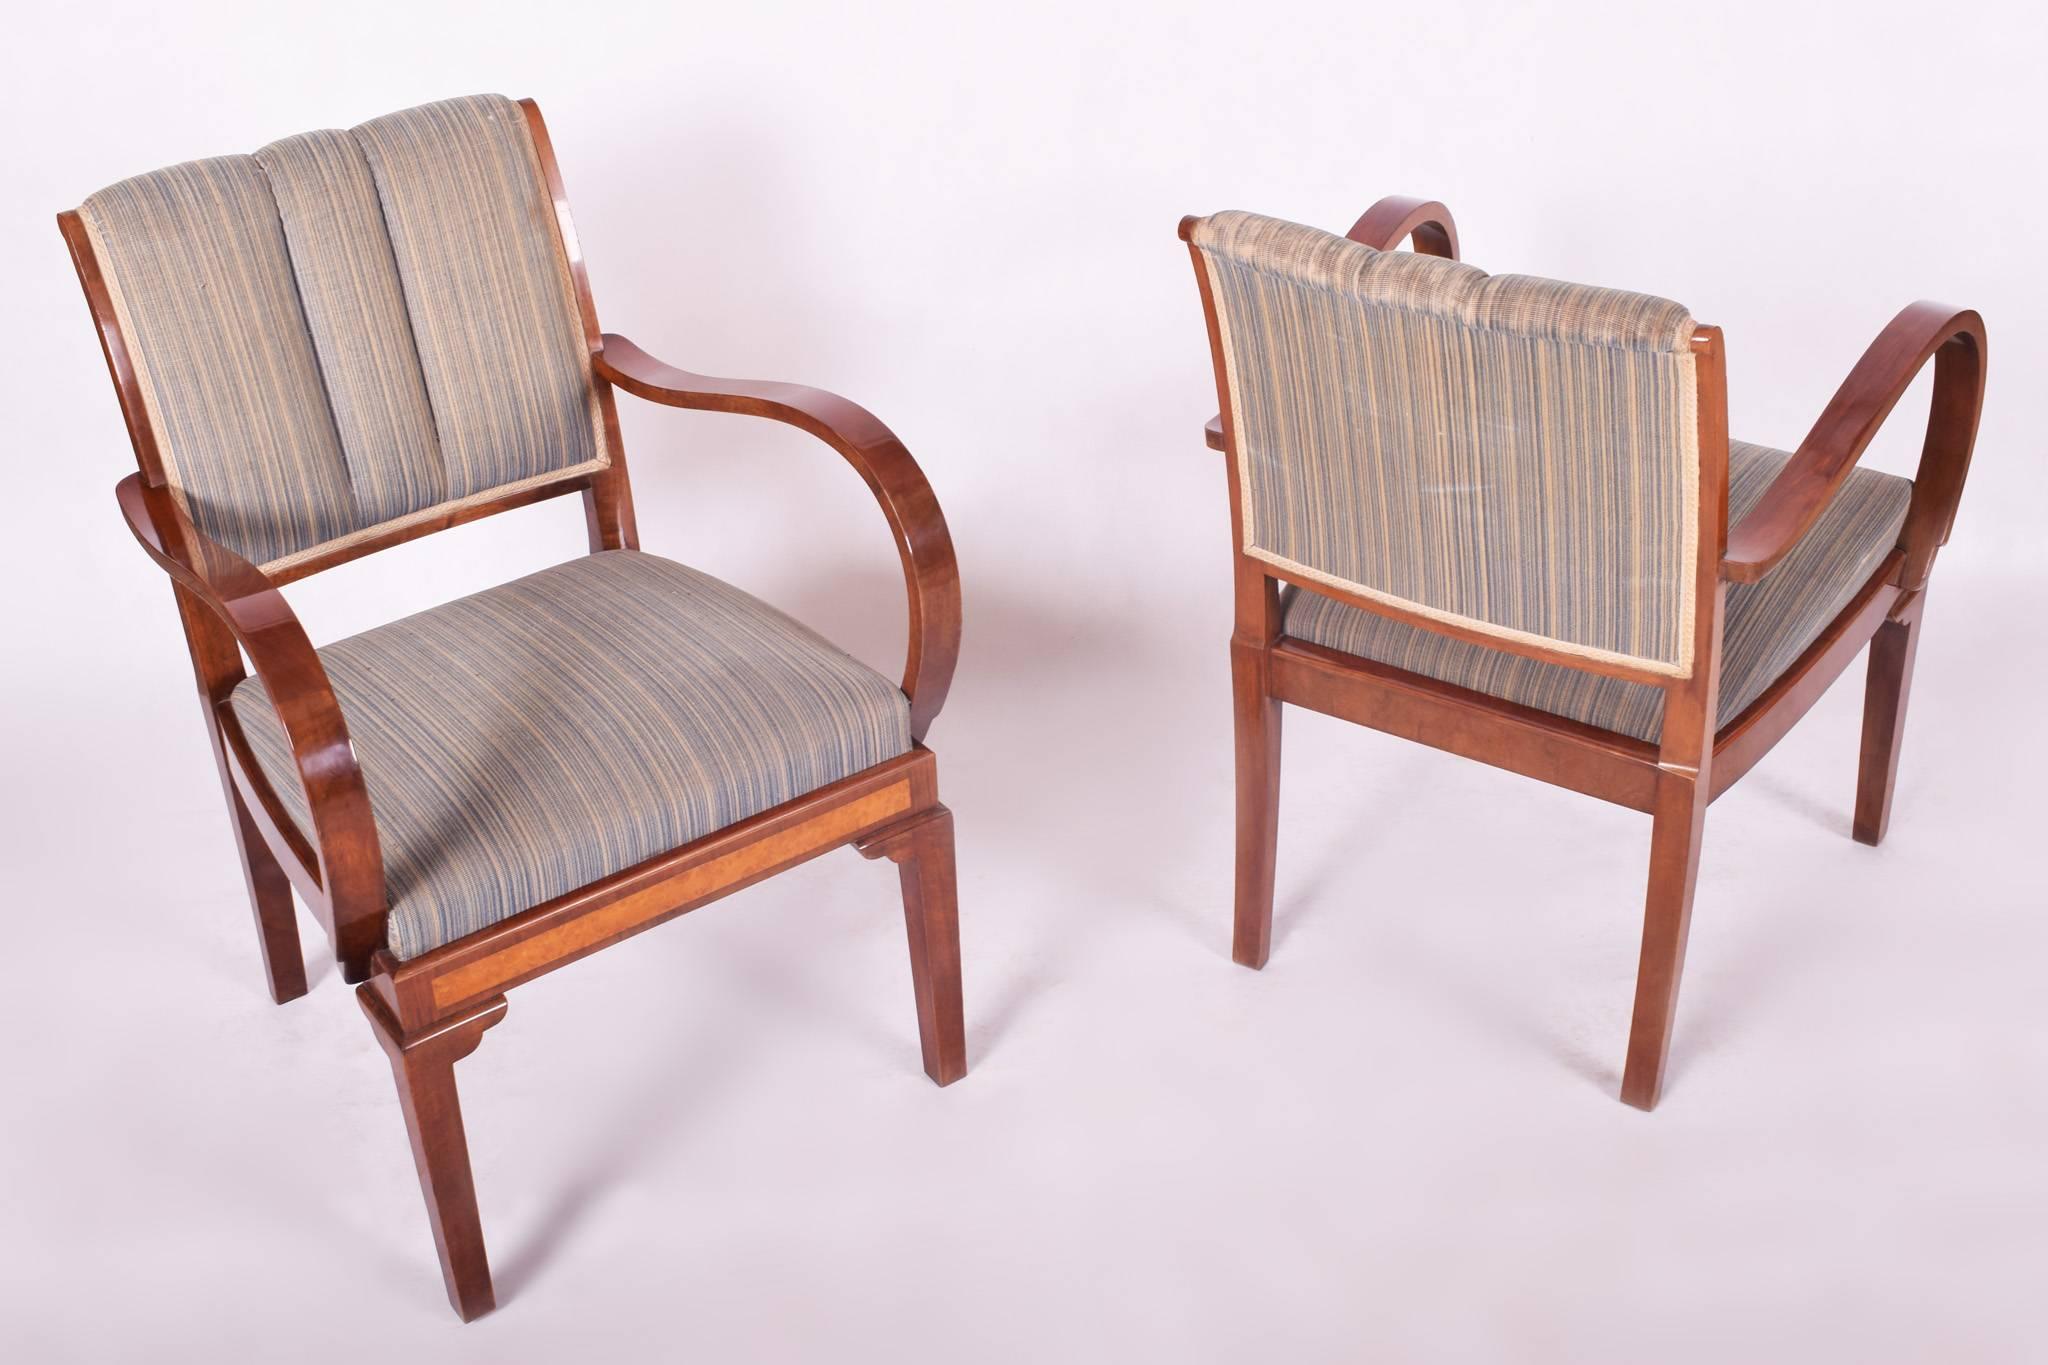 Mid-20th Century Restored Pair of Art Deco Armchairs, Original Preserved Fabric, Shellac Polish For Sale